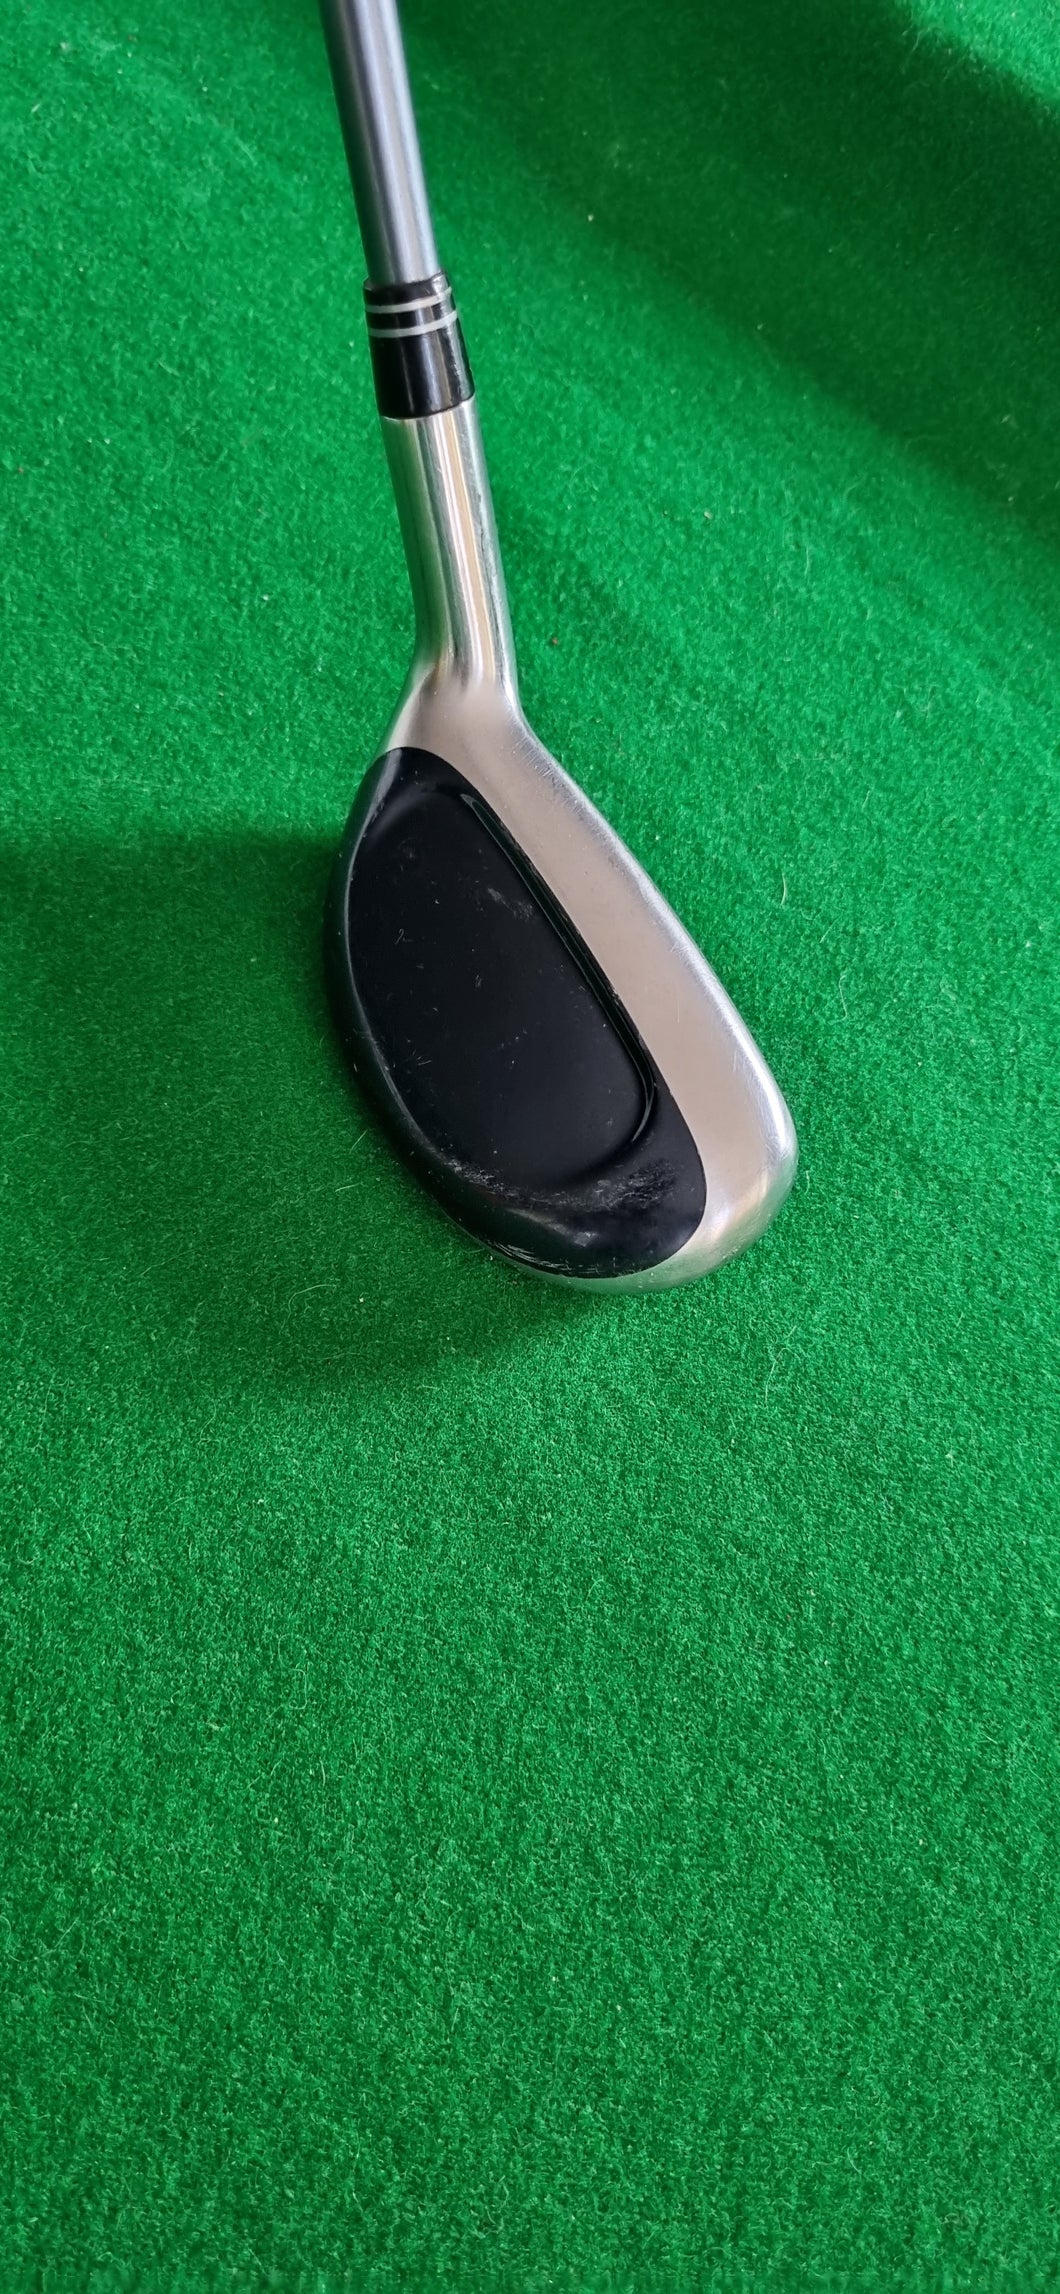 Nicklaus IronMax Hi-Max 2 Hybrid 18° Stiff with Cover